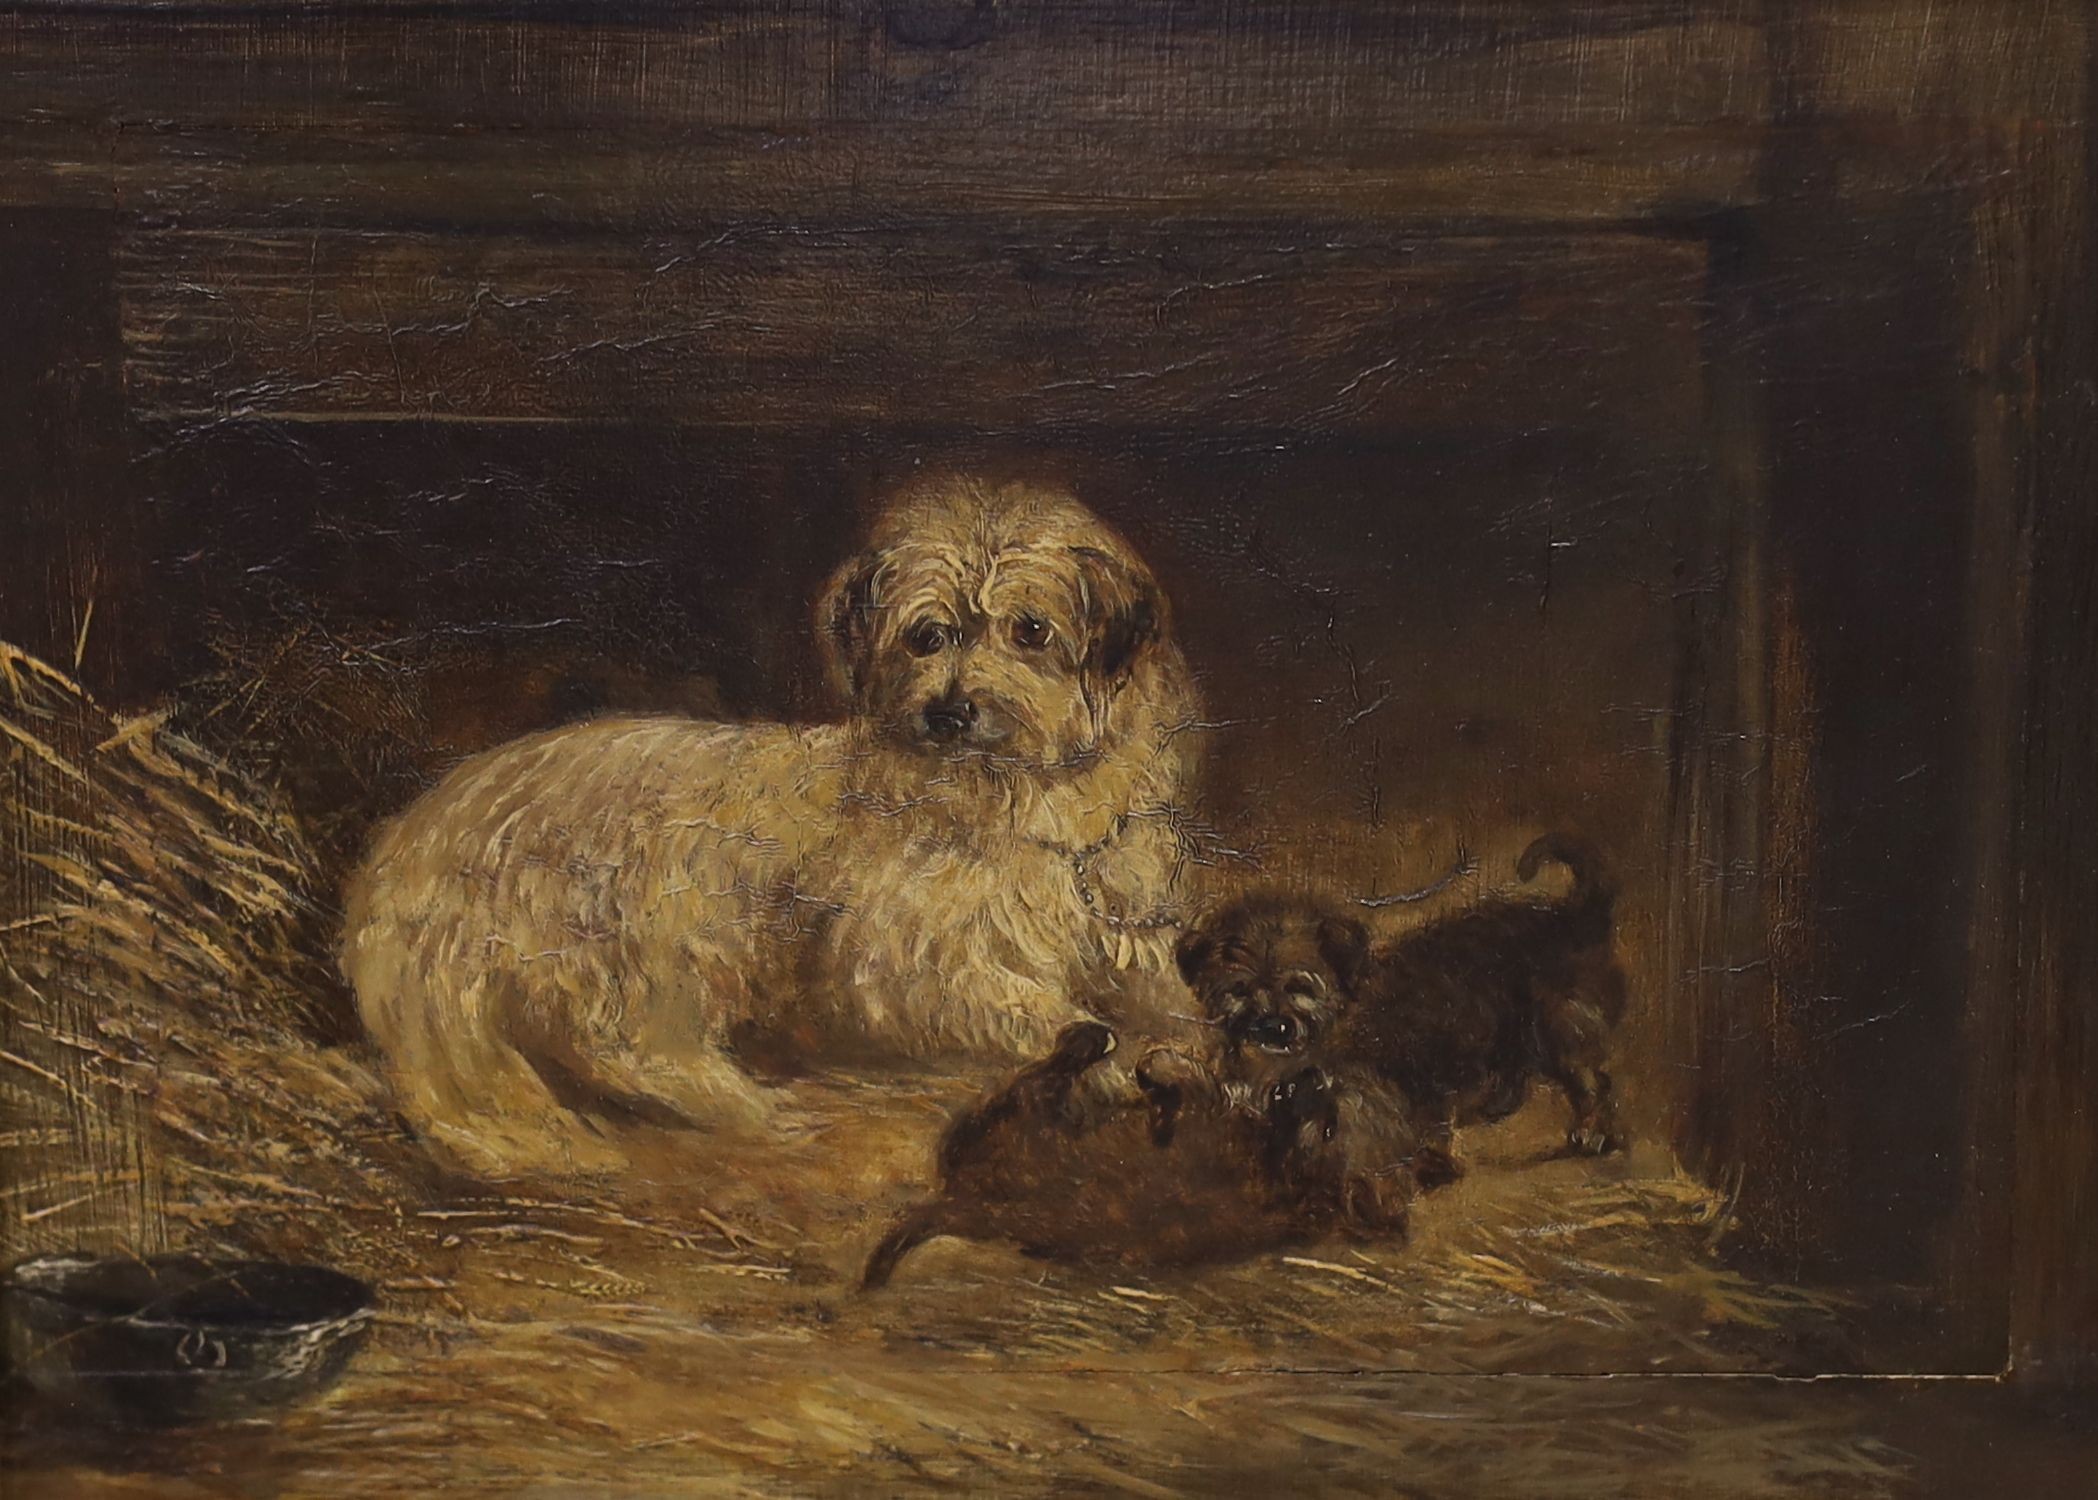 After Armfield, oil on wooden panel, Bitch and puppies in a stable, 17 x 23cm